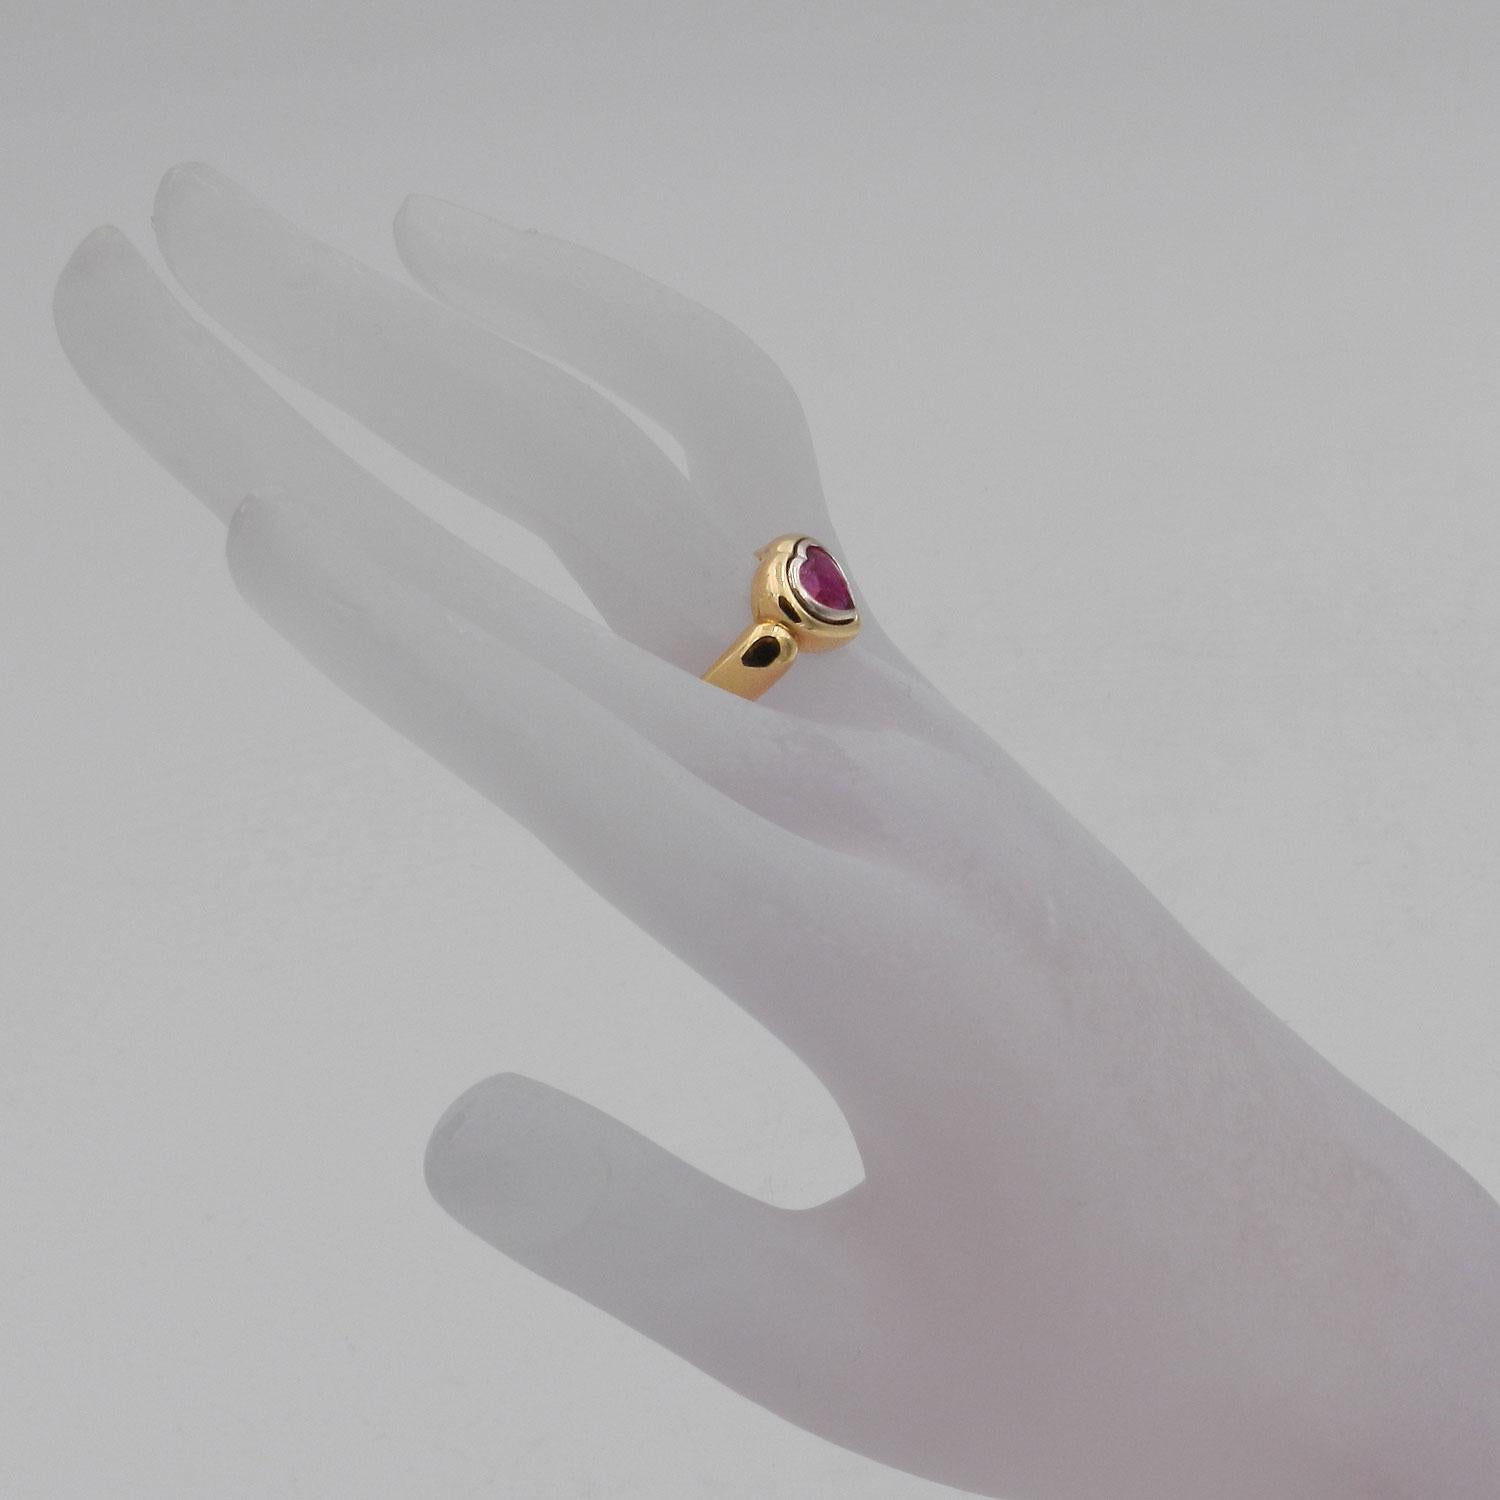 Certified Heart Shaped 1.3 Ct No Heat Ruby 18 K Yellow Gold Ring For Sale 1